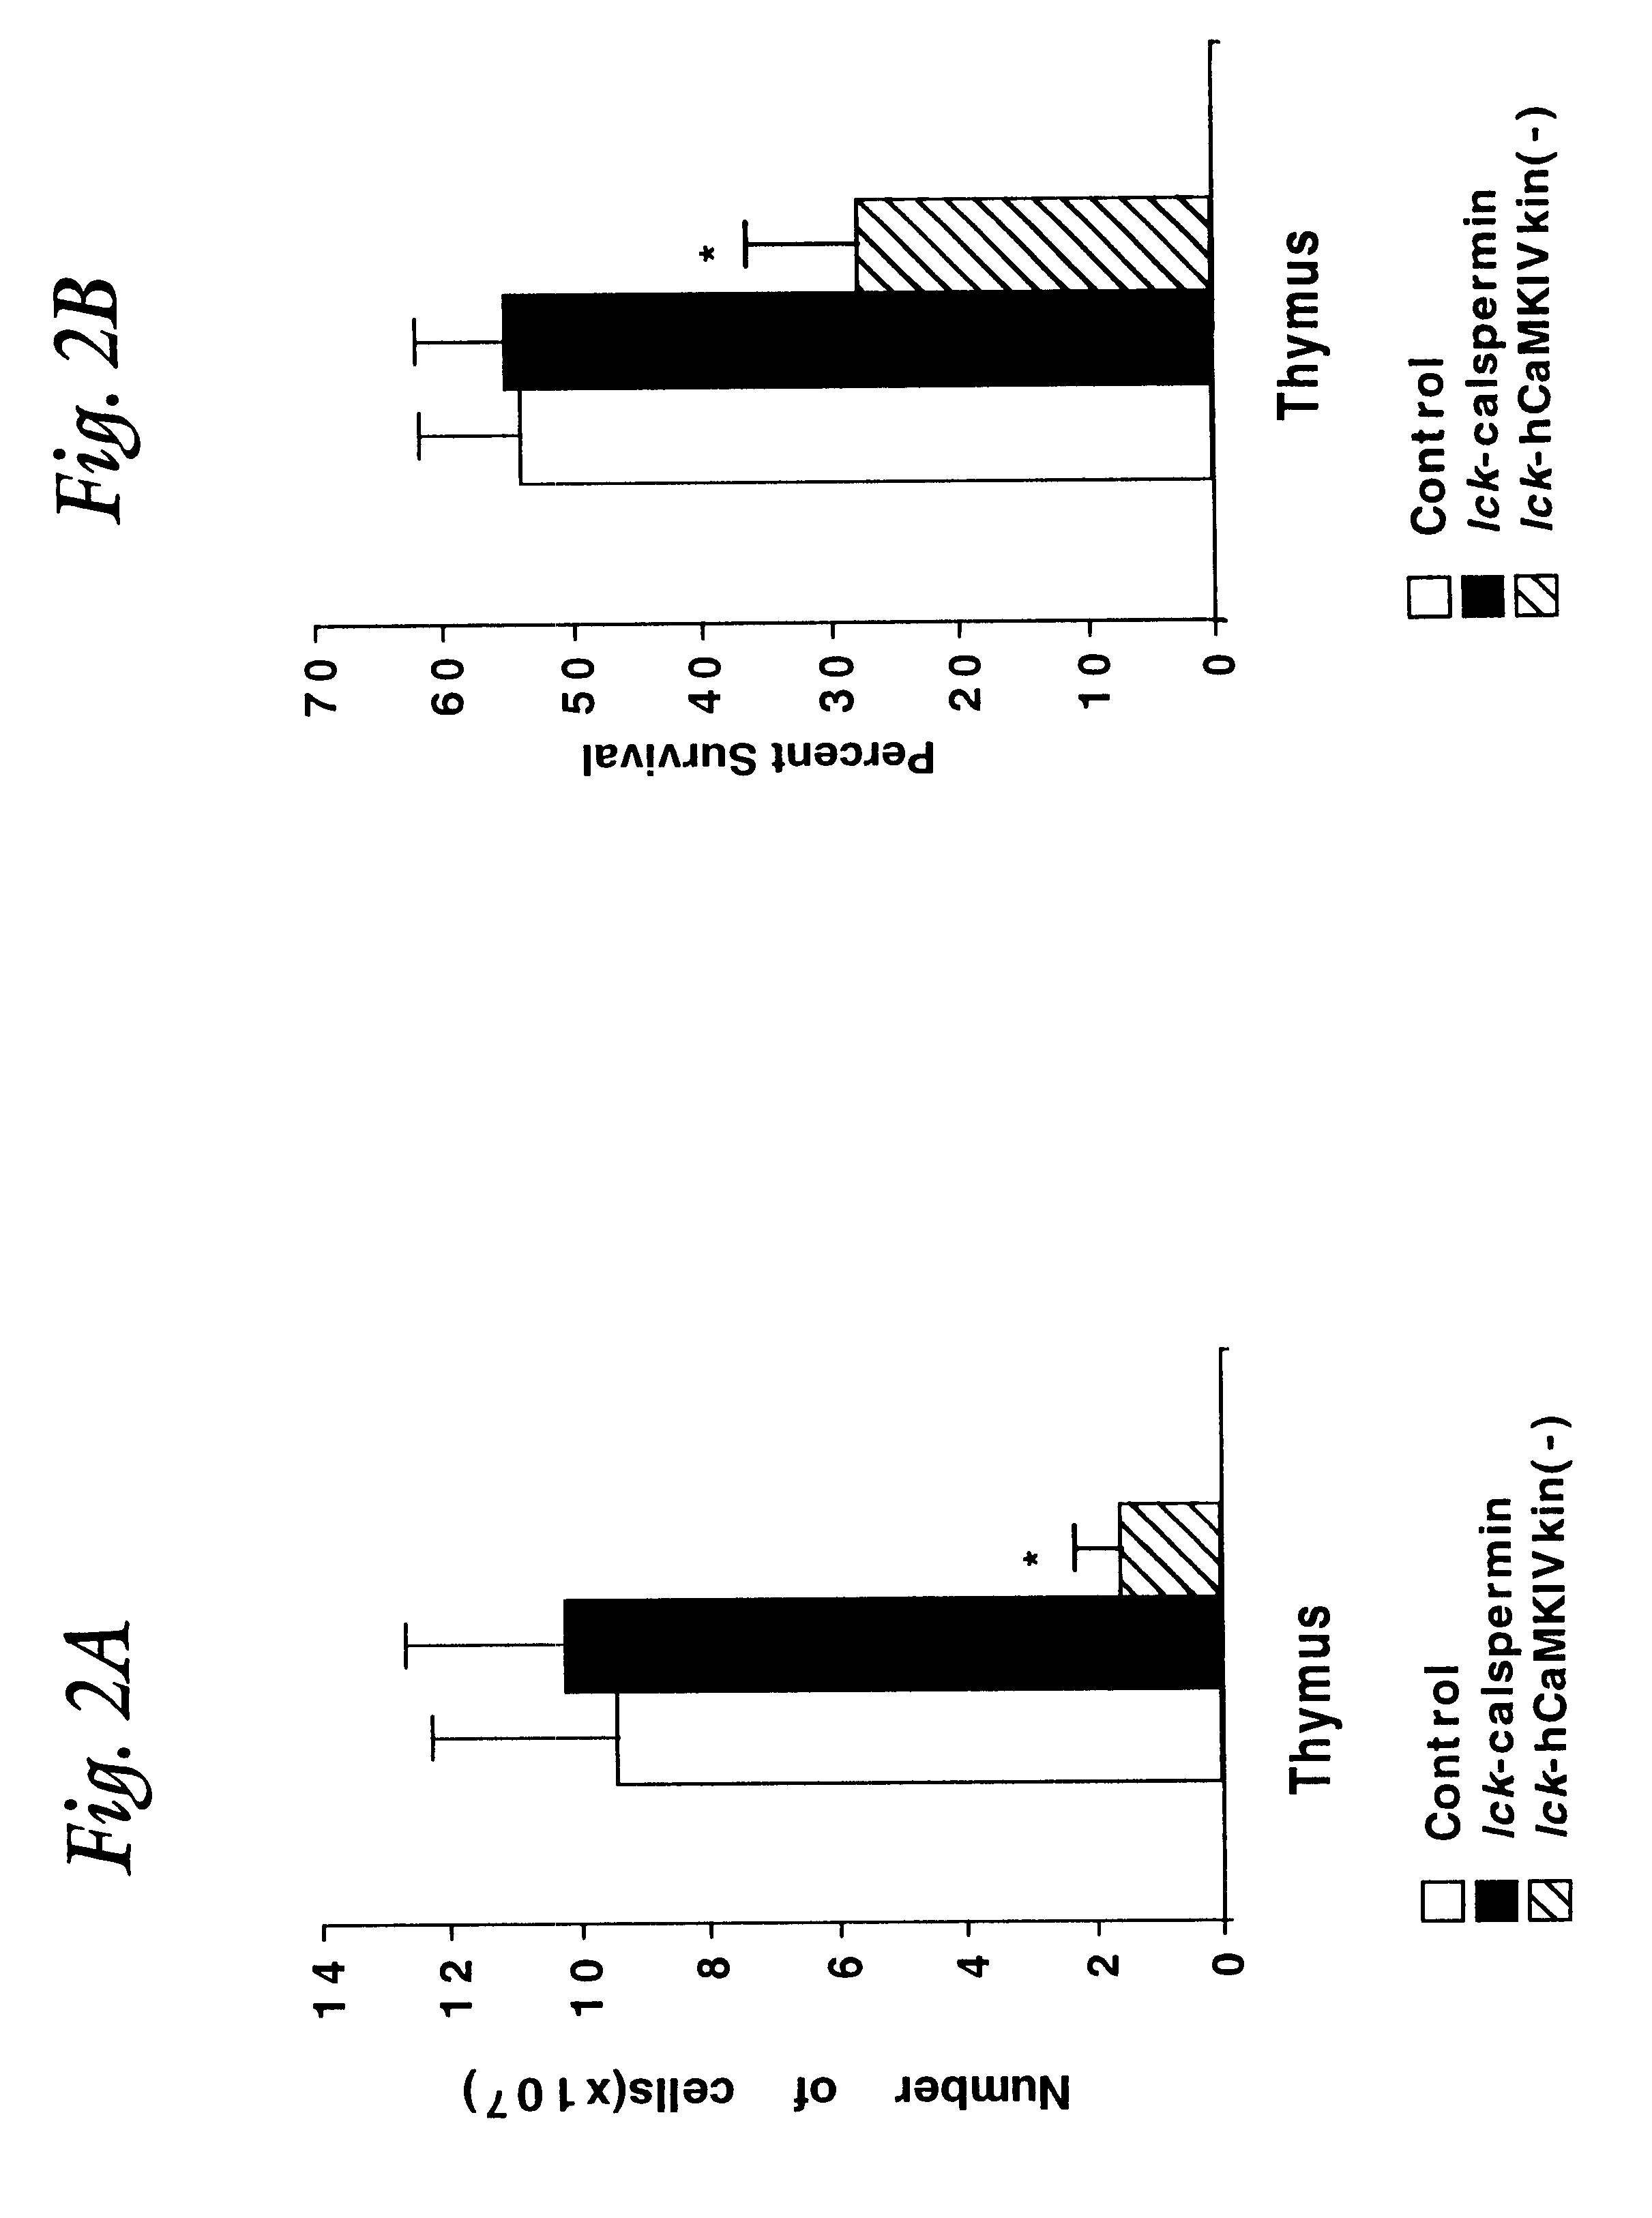 Method for screening a test compound for potential as an immunosuppressive drug candidate